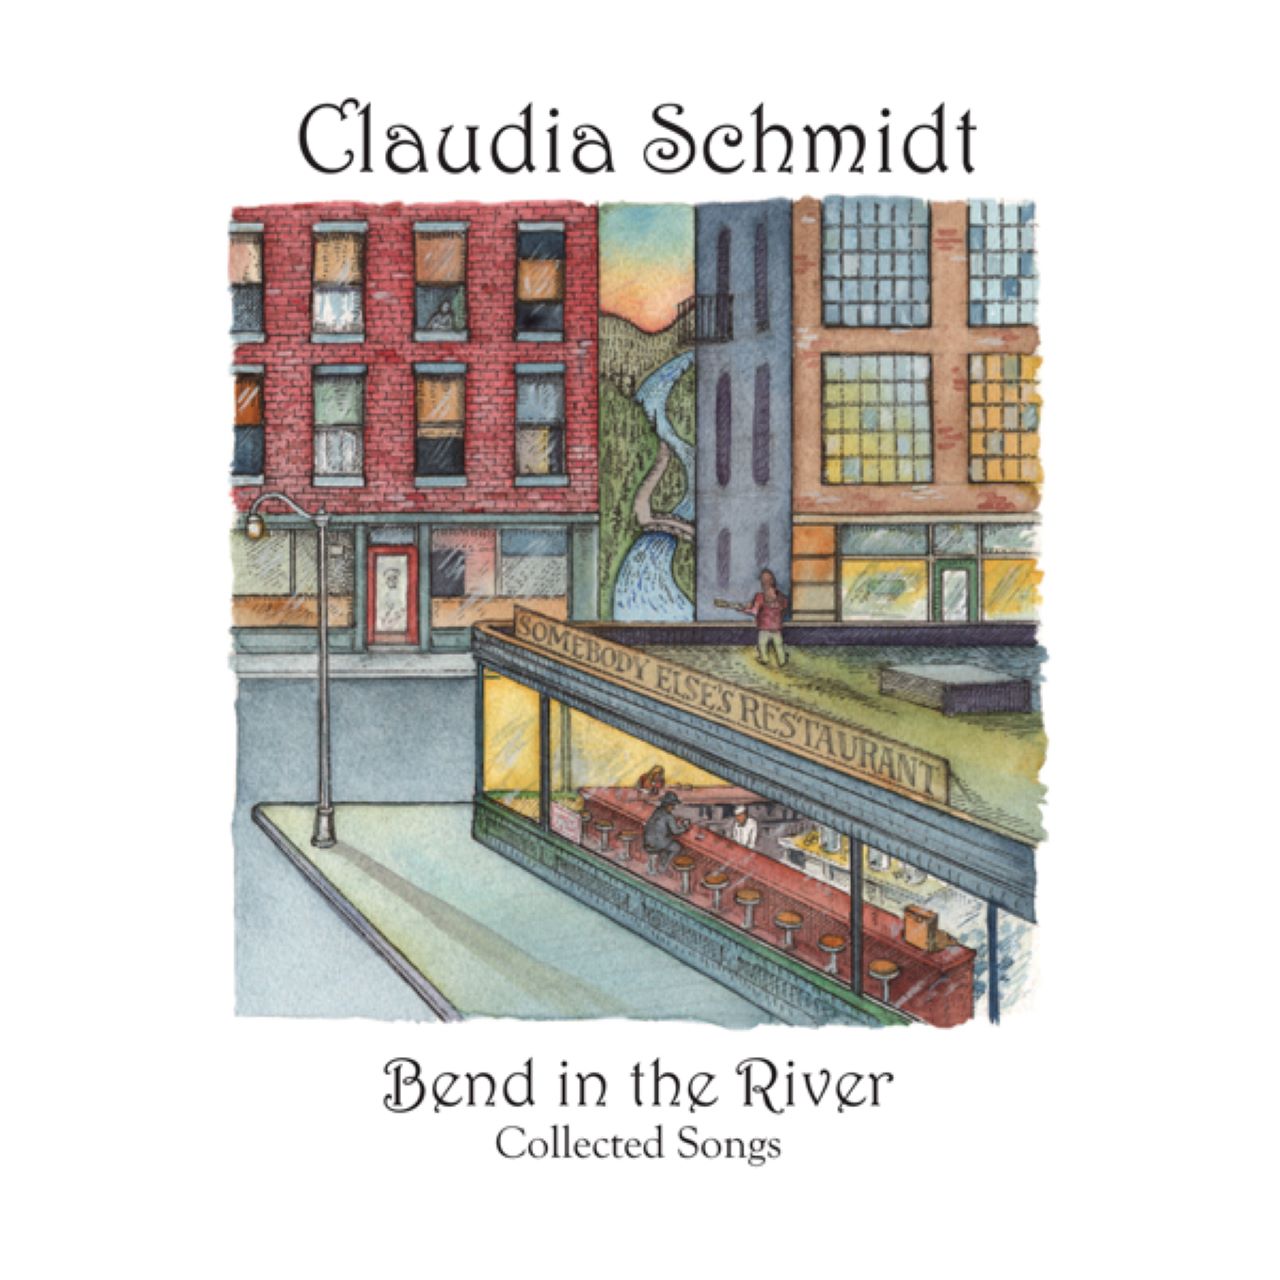 Claudia Schmidt - Bend In The River Collected Songs cover album